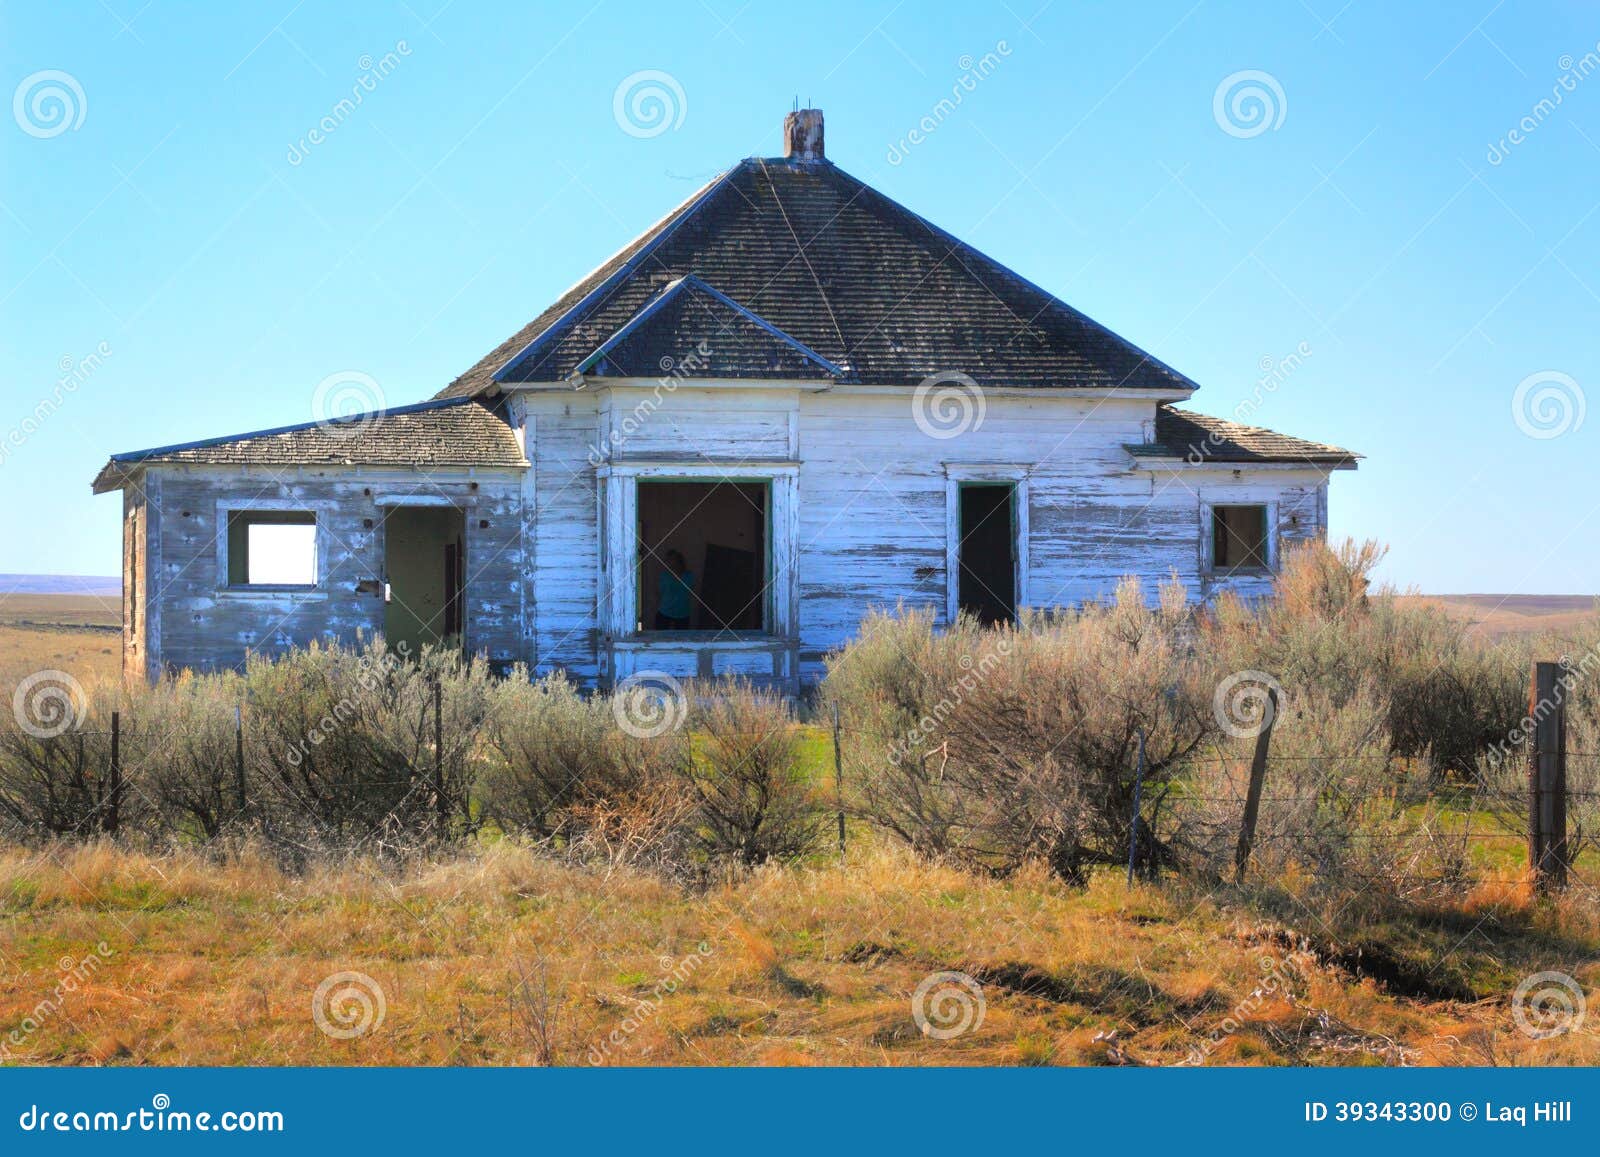 abandoned frontier dwelling